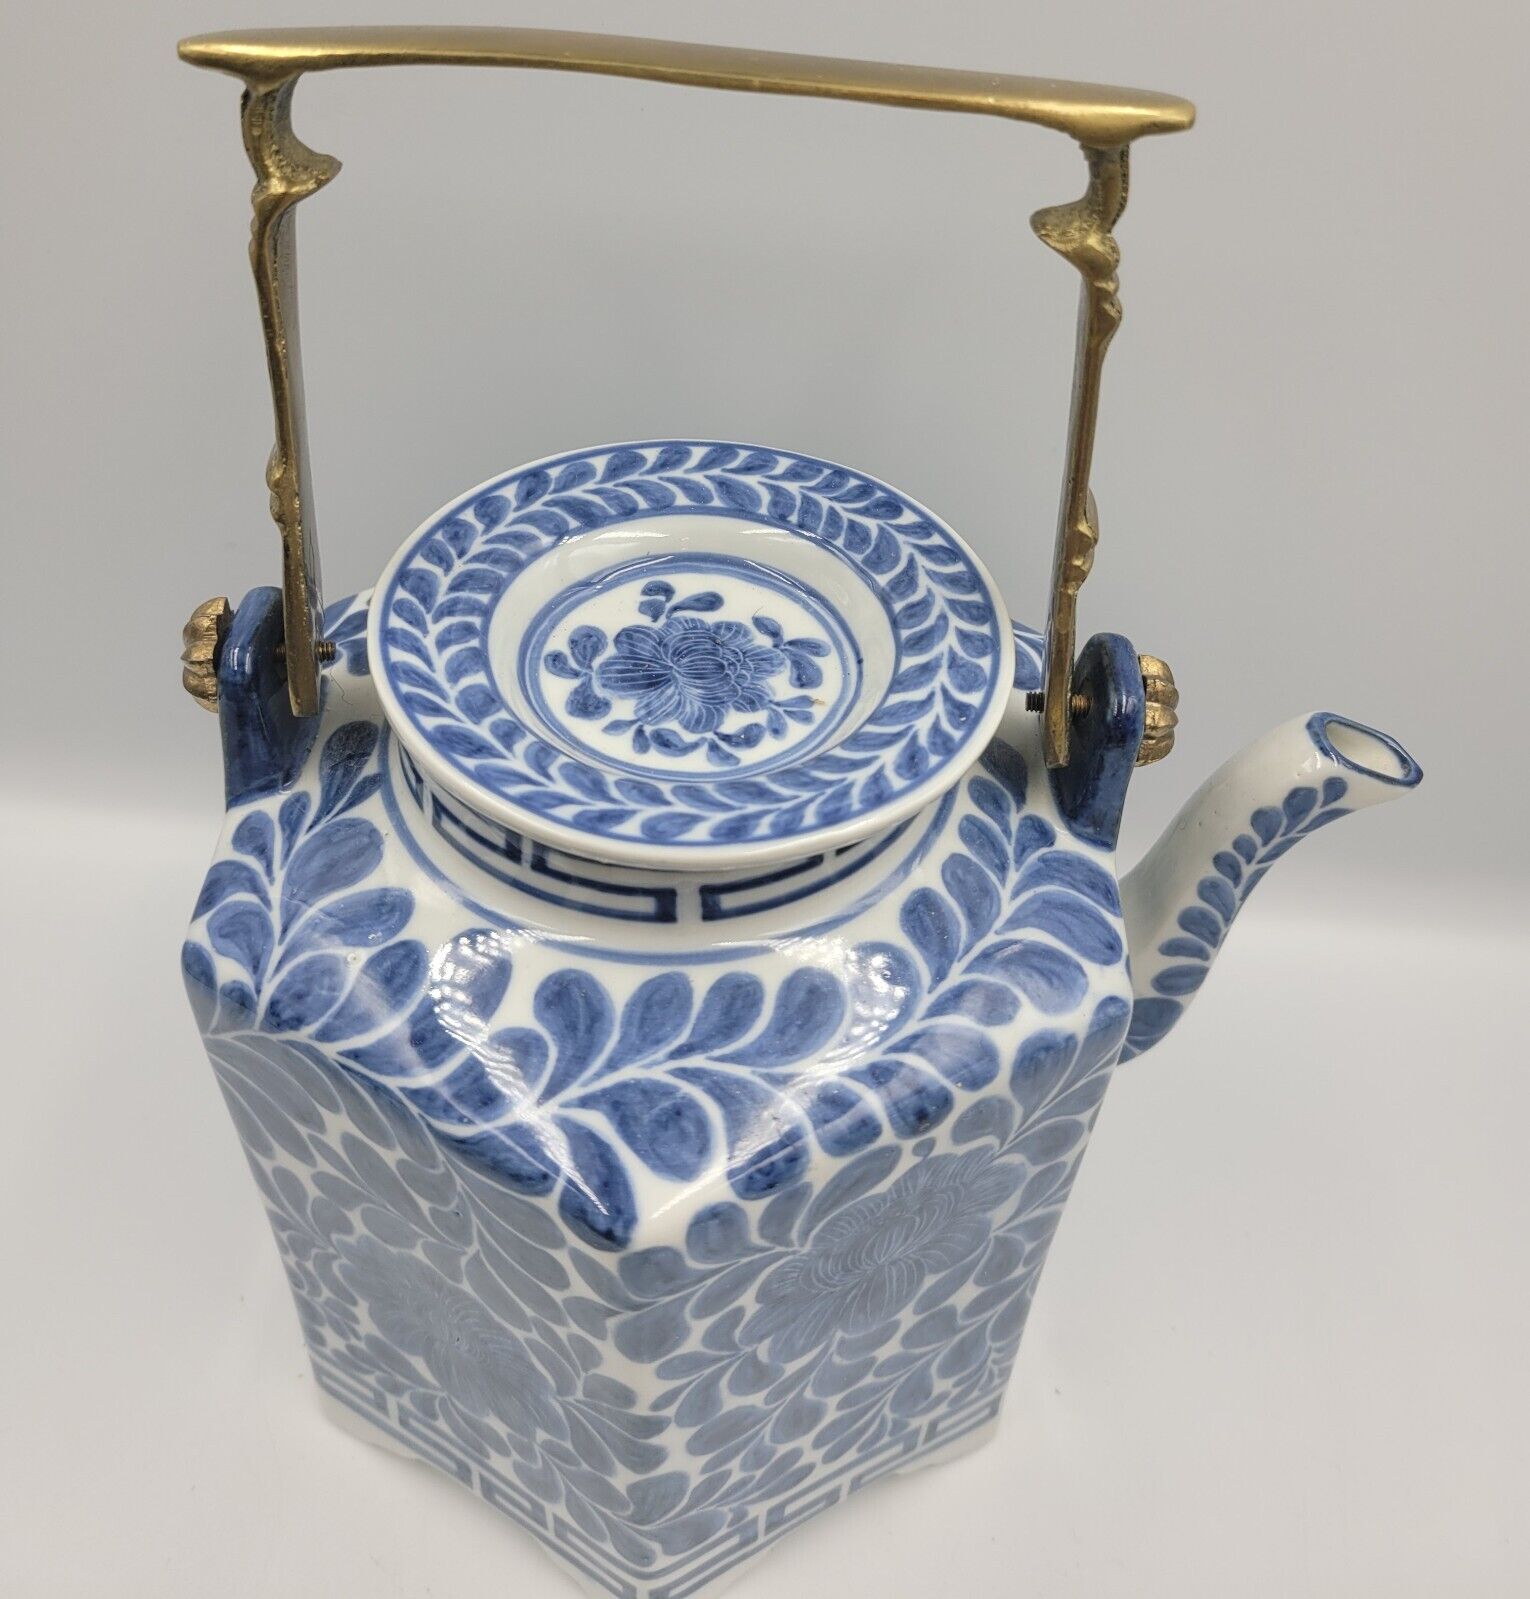 Vintage Blue White Hexagon Teapot Brass Handle Chinese Handpainted In Thailand